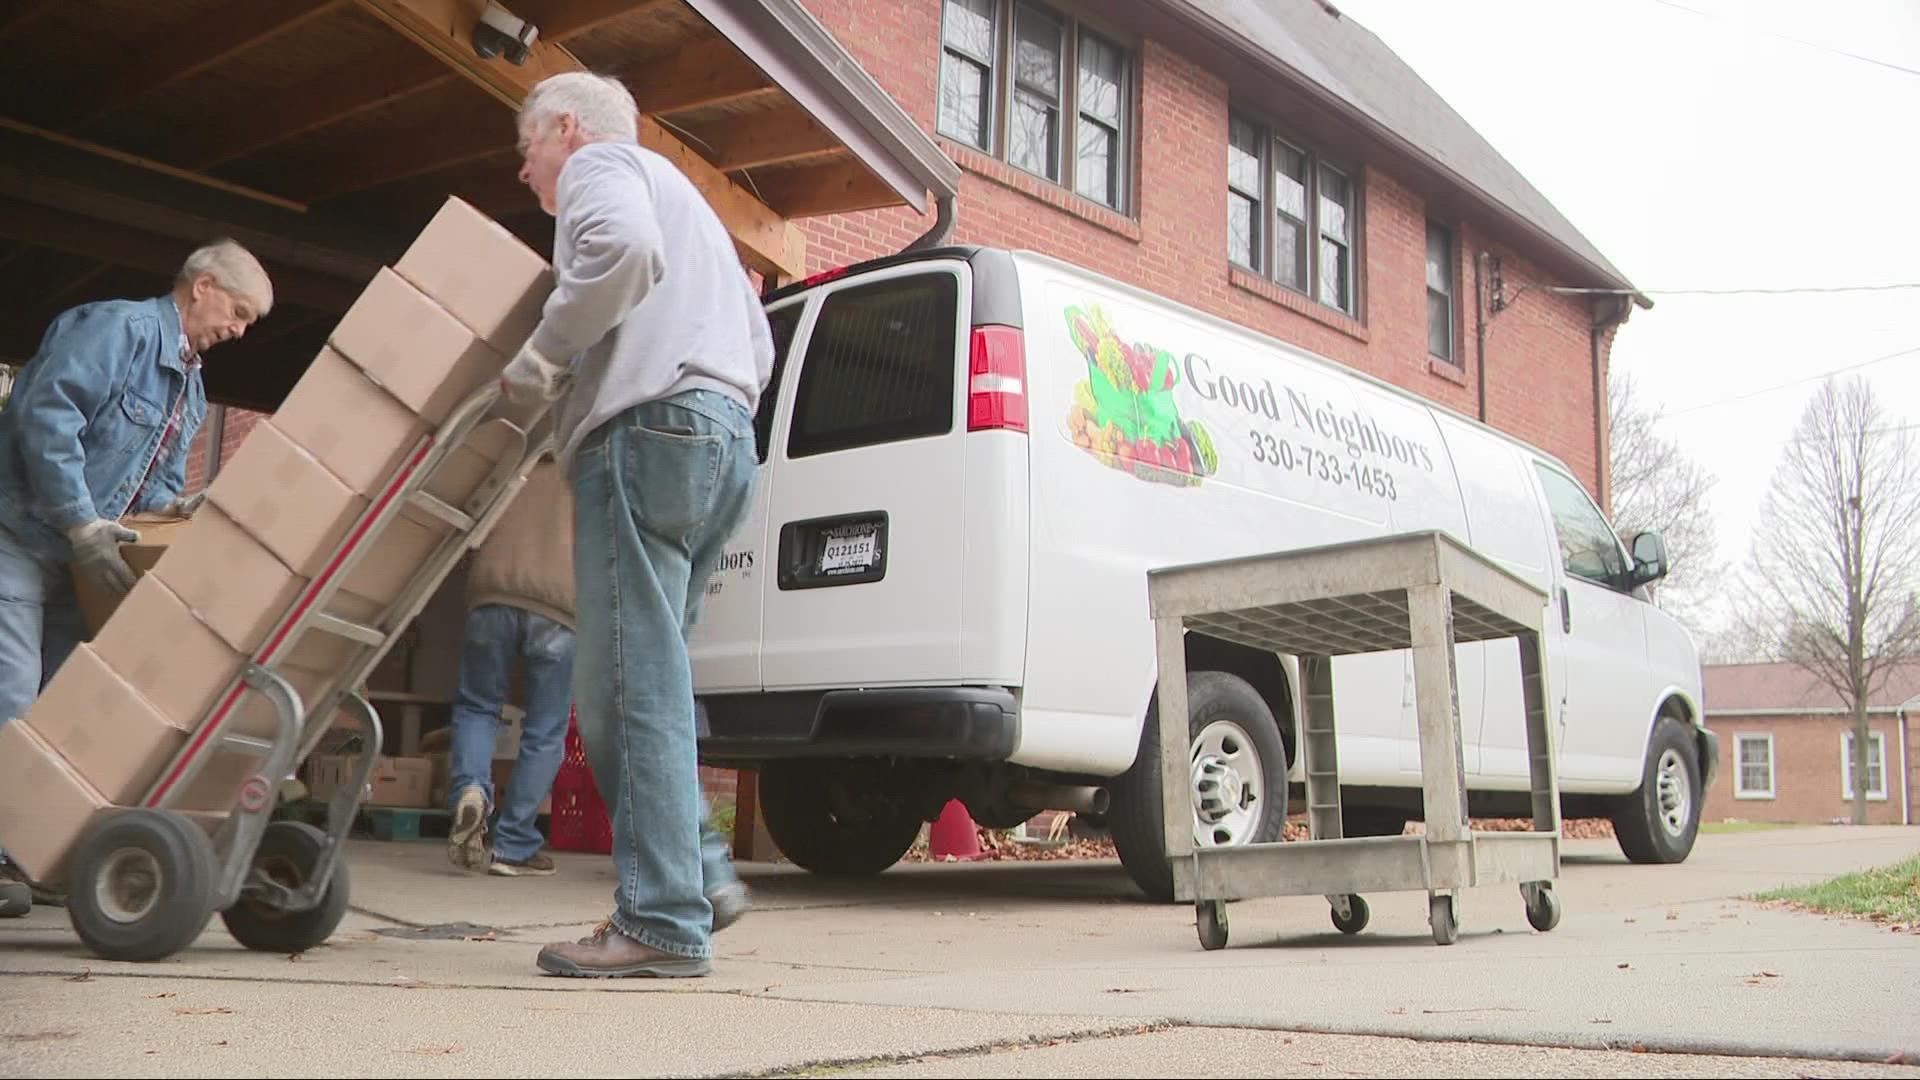 The Good Neighbors food pantry says demand for food usually increases in November and December.